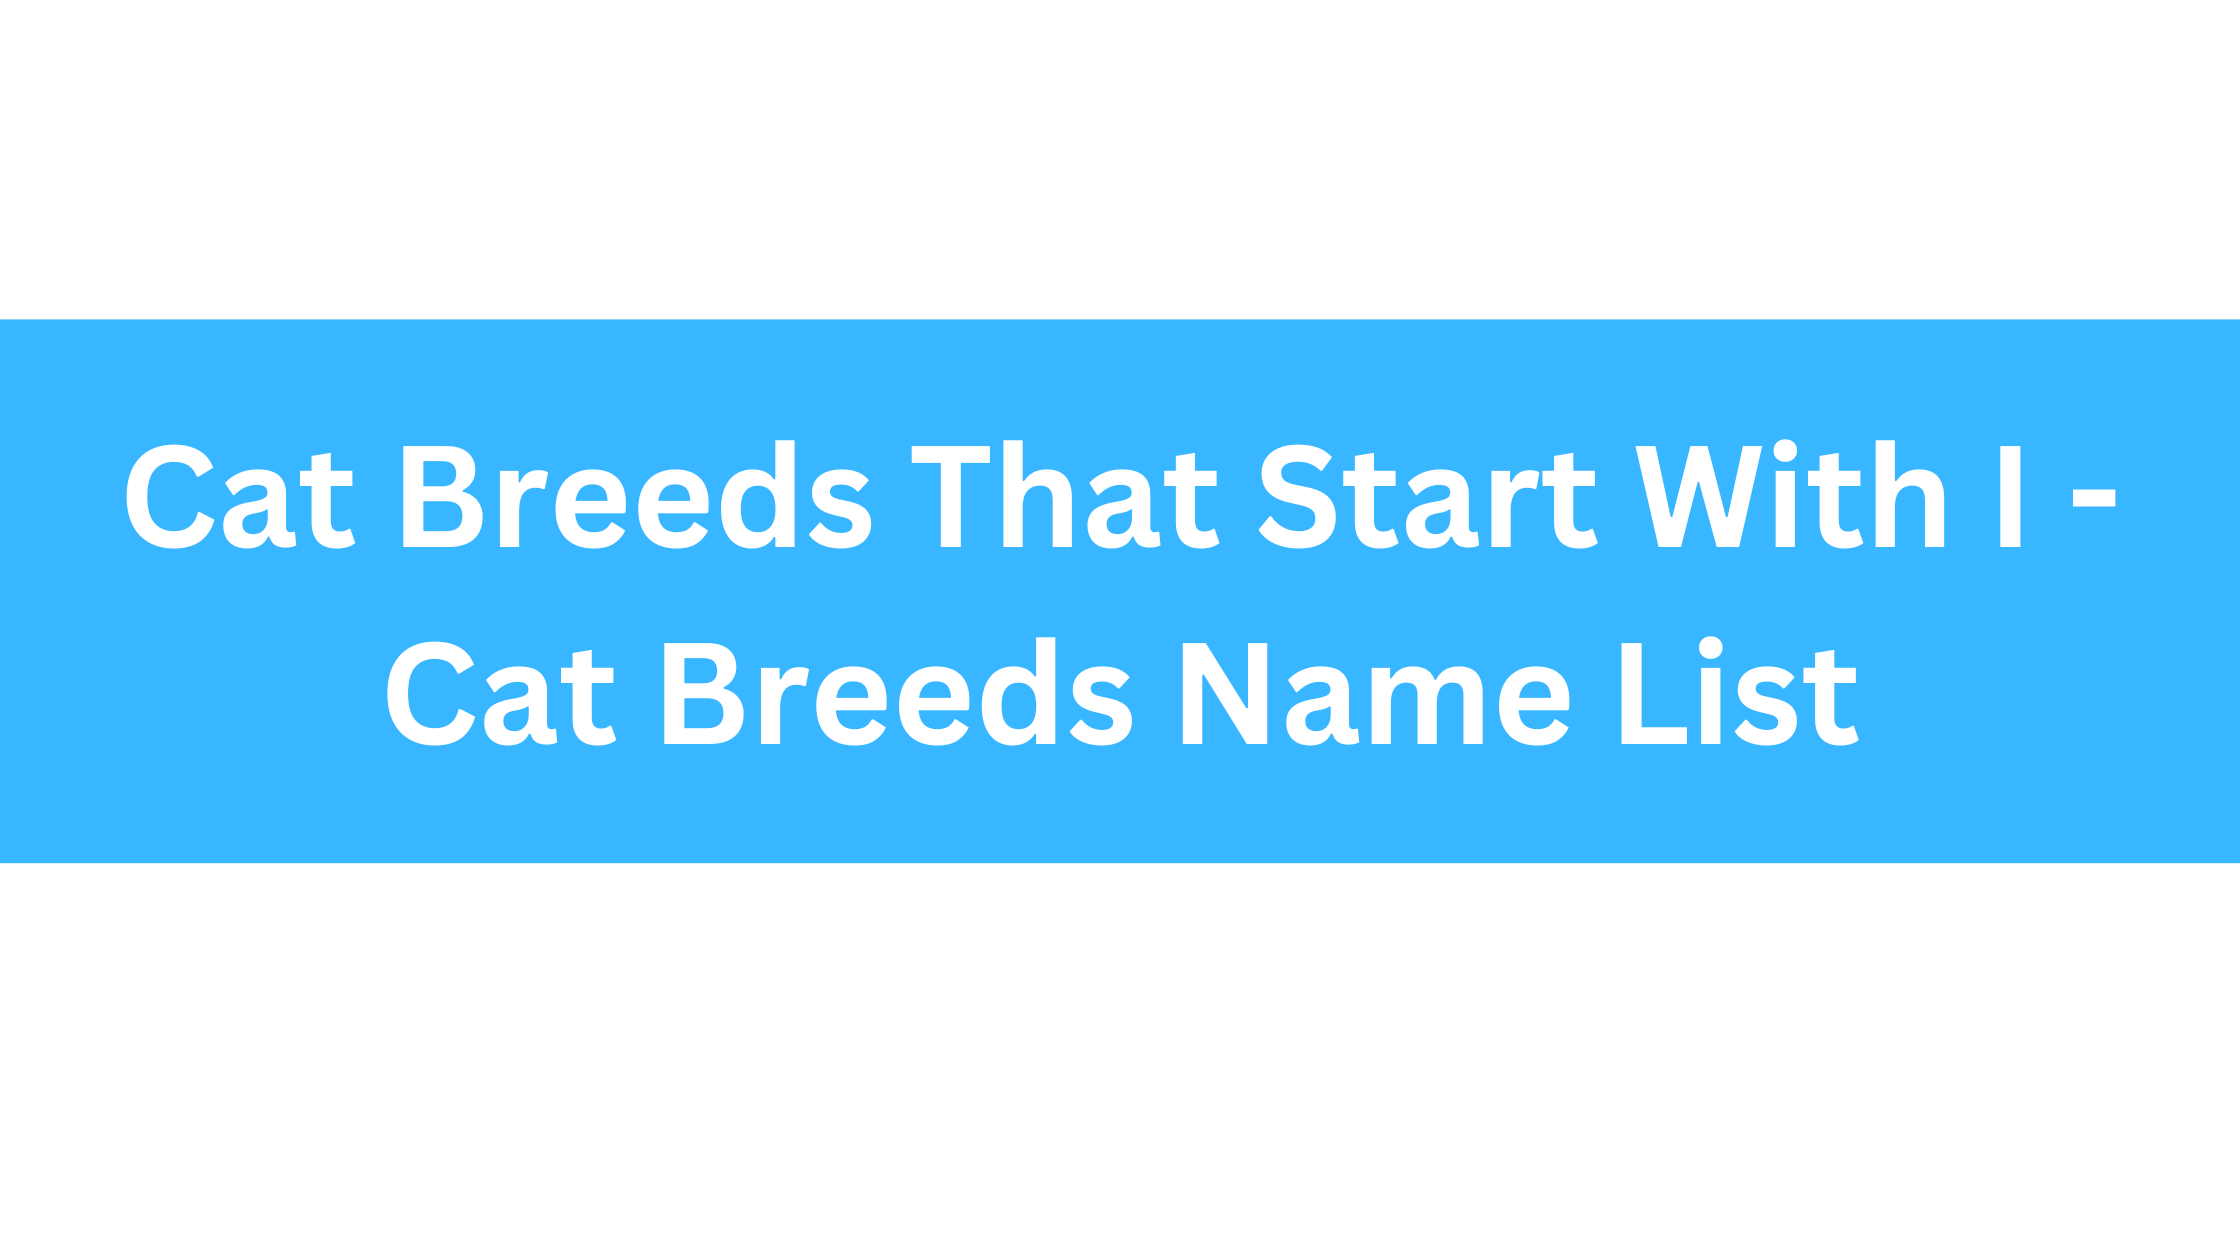 Cat Breeds That Start With I